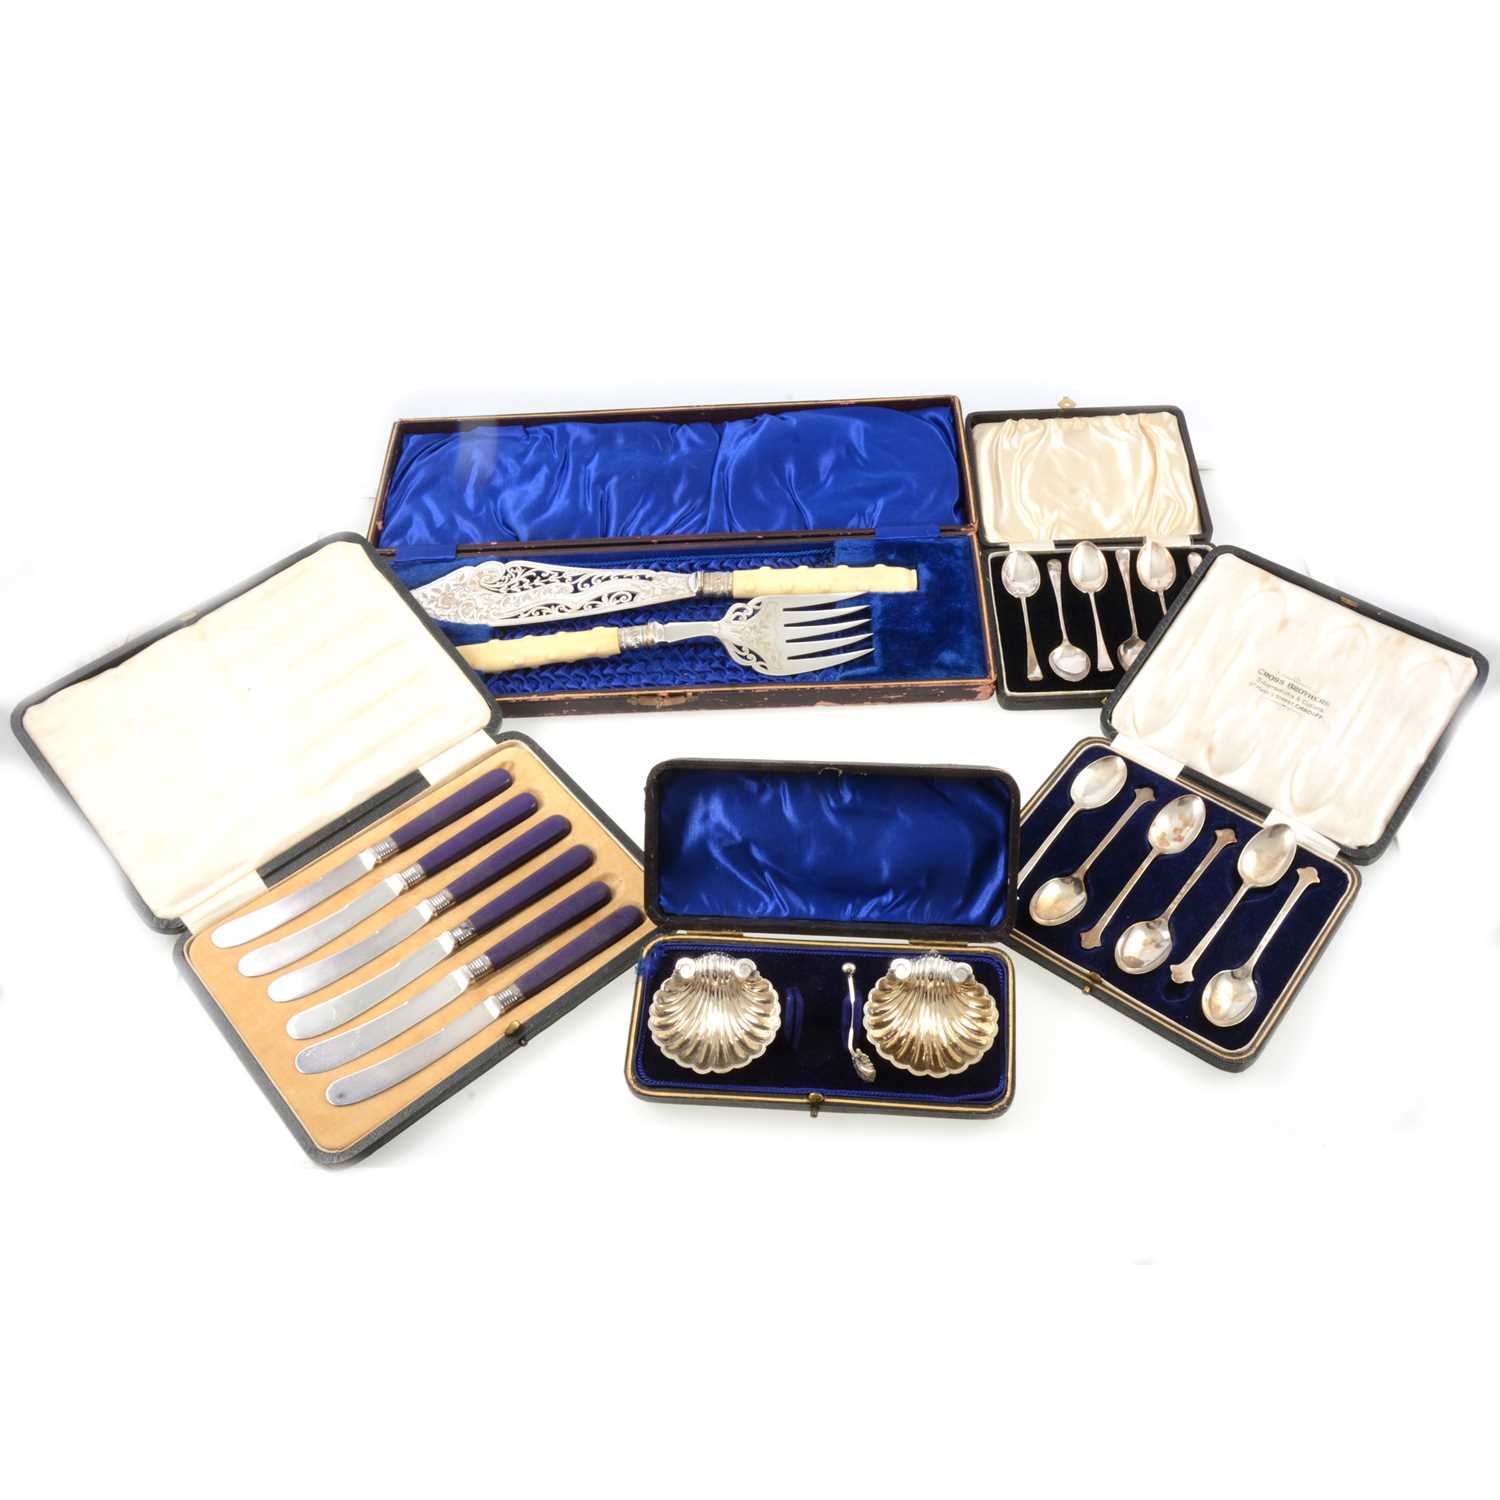 Lot 153 - Pair of silver shell salts, William Henry Leather, Birmingham 1900, and other cased silver and plated flatware.